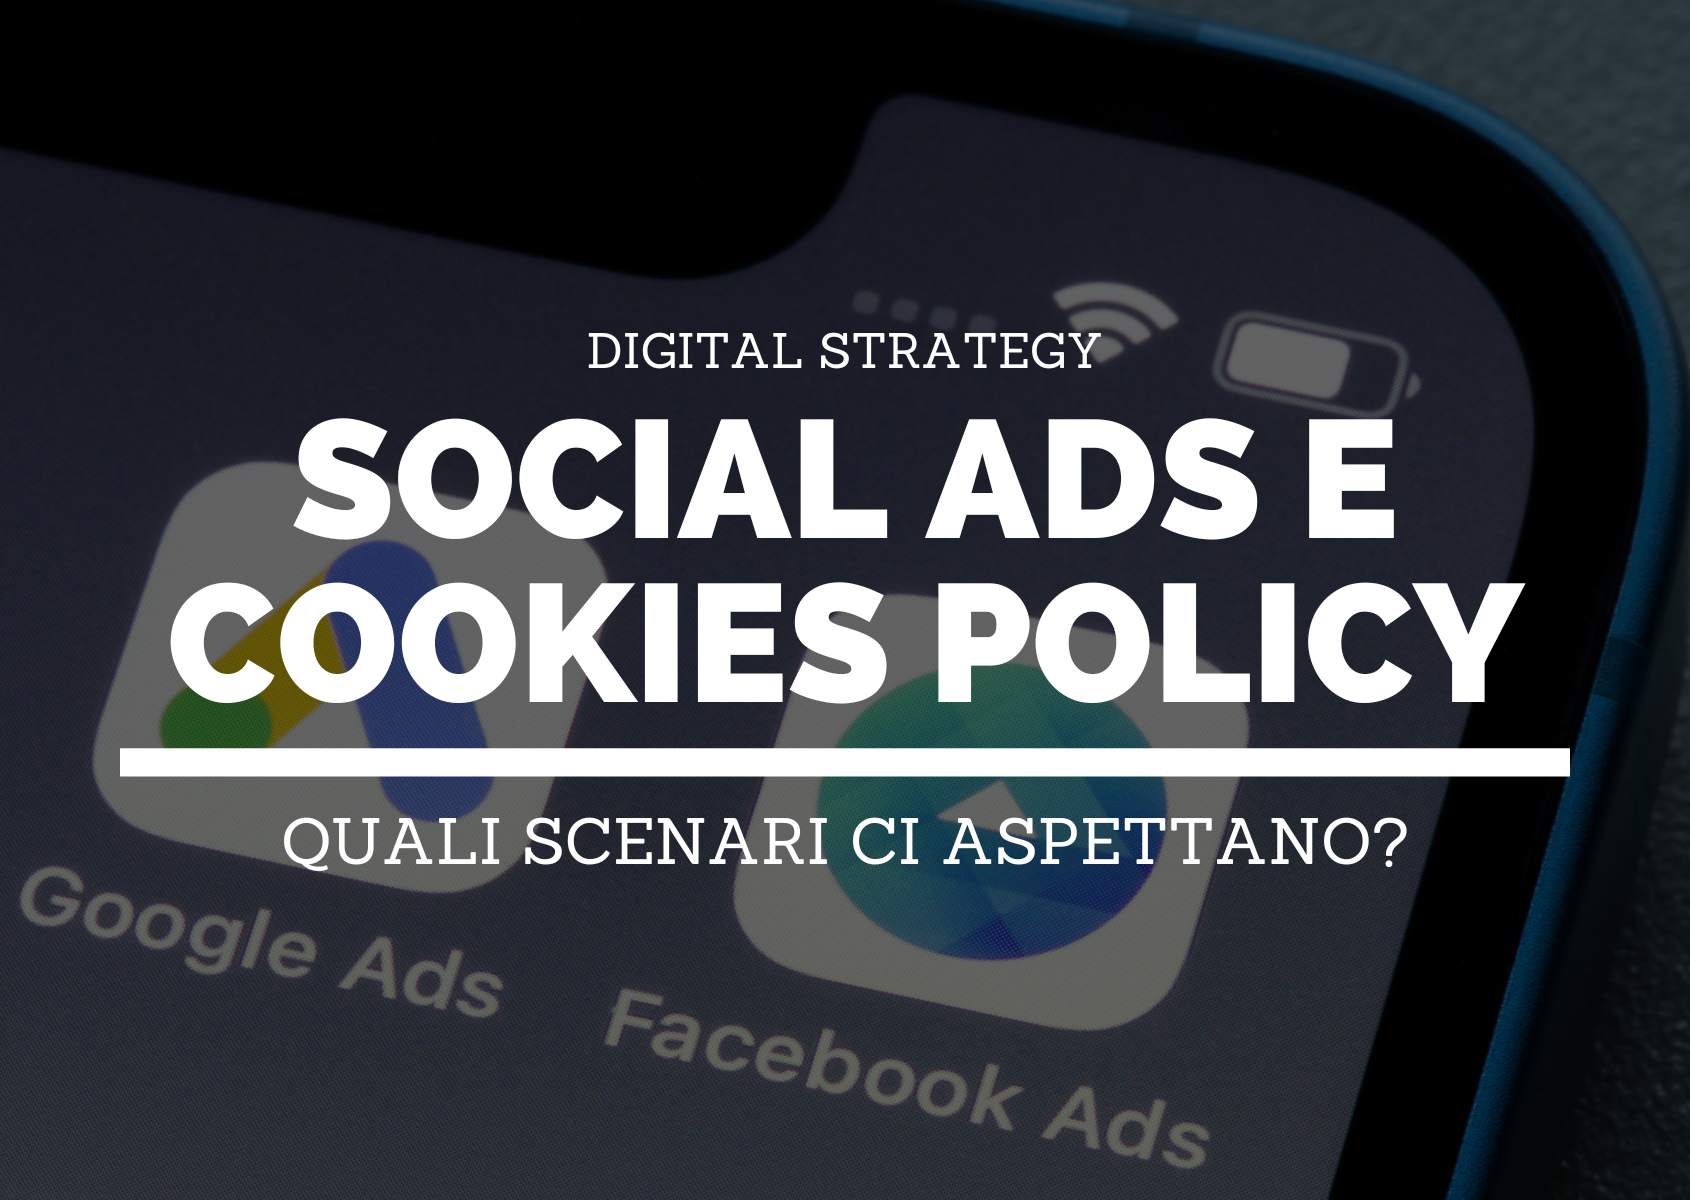 Social-ads-cookies-policy-header